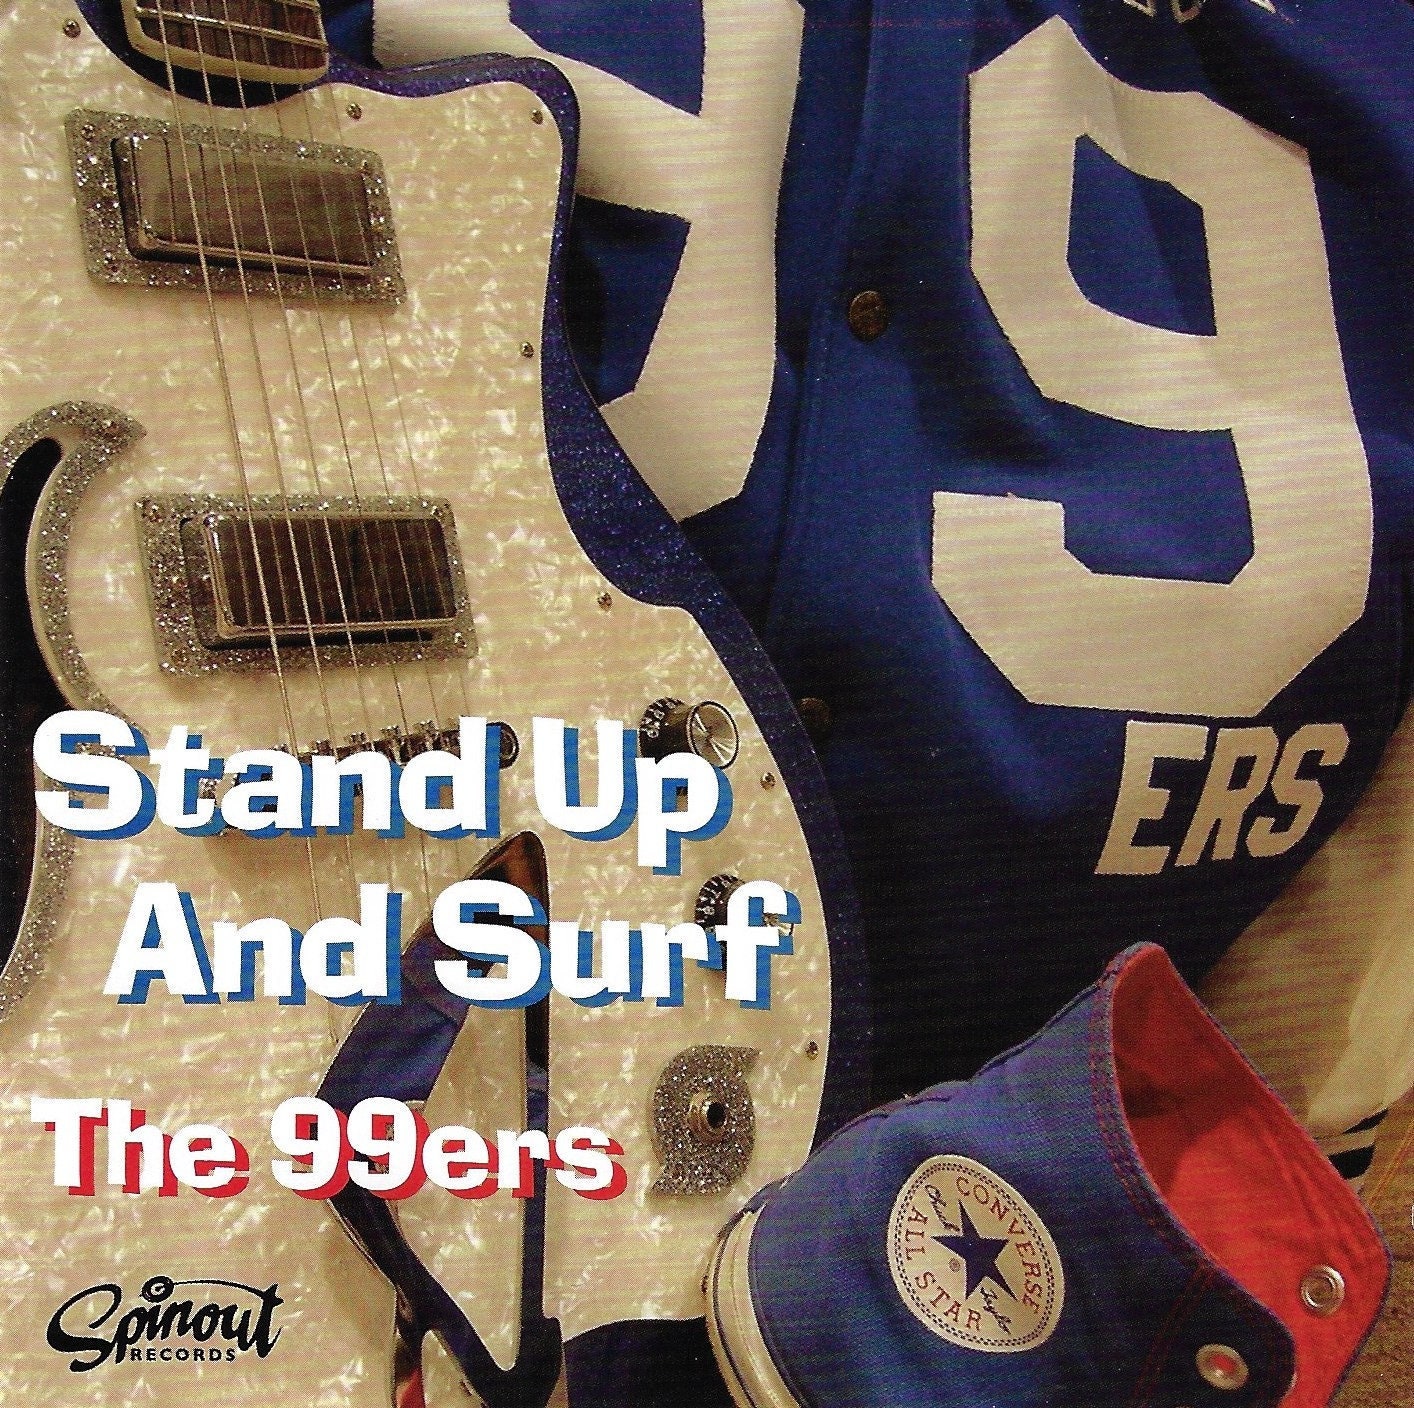 The 99ers "Stand Up and Surf" CD